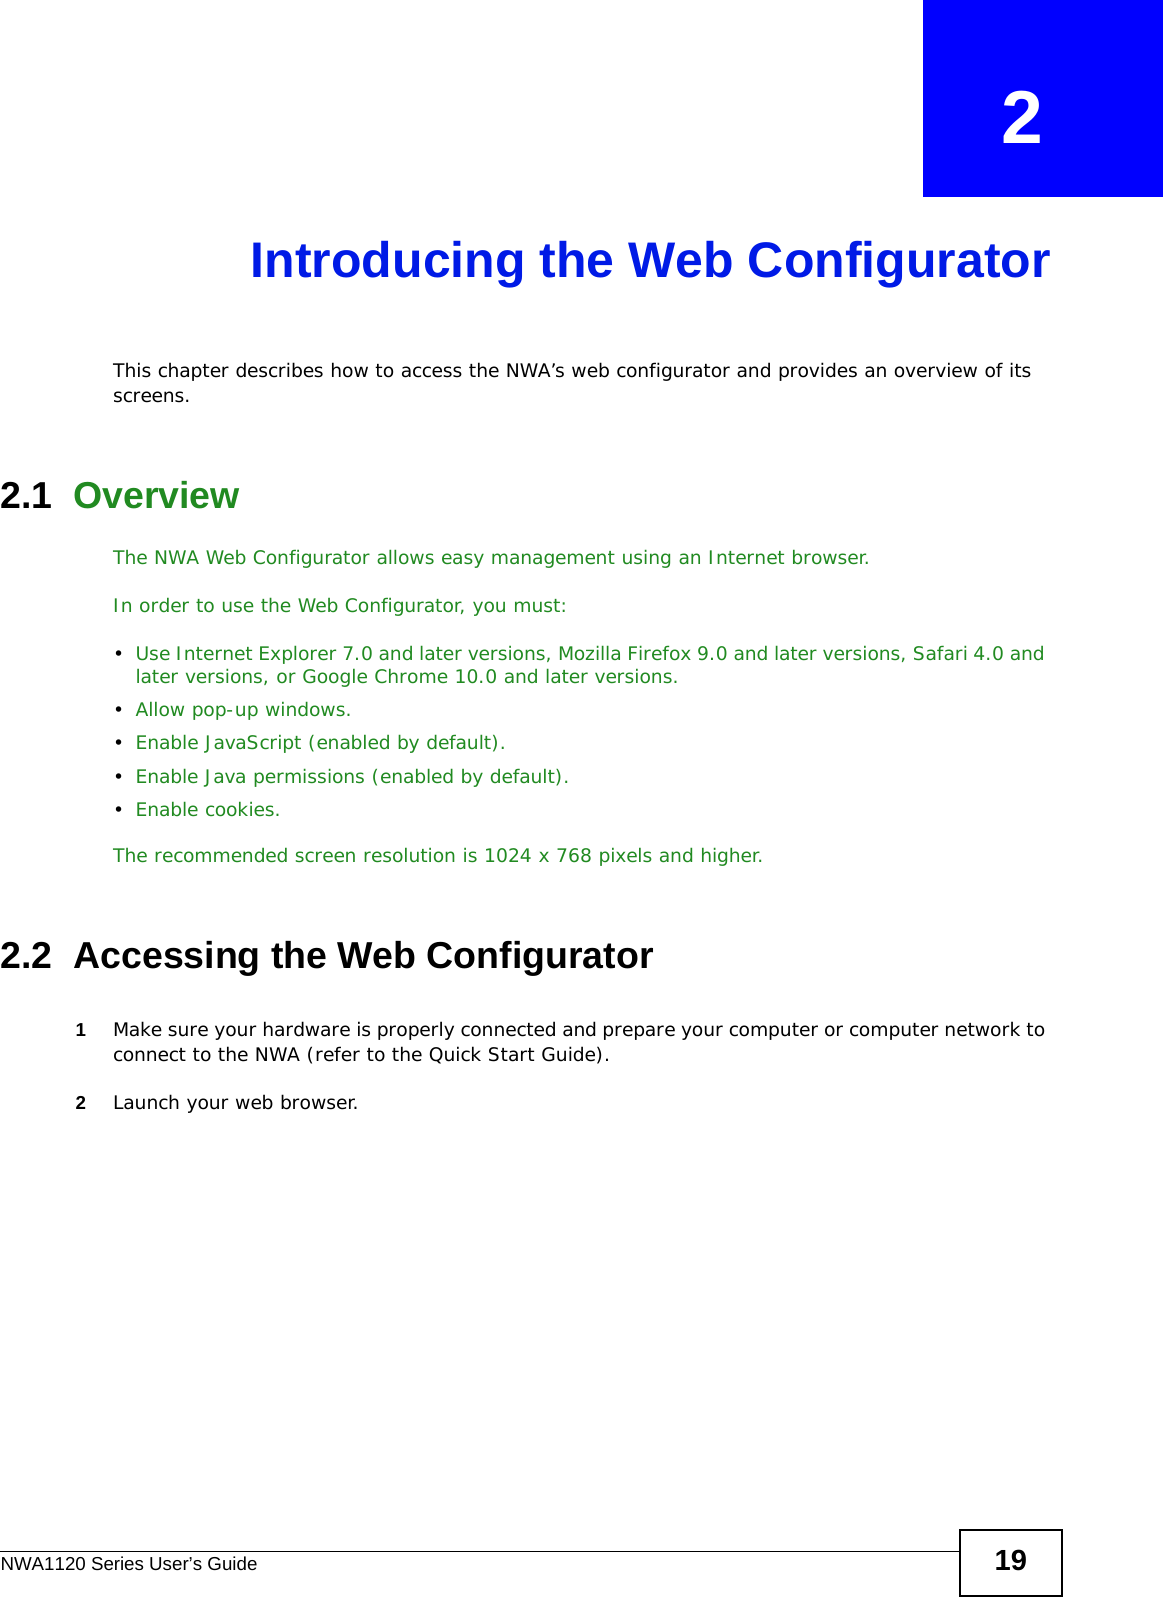 NWA1120 Series User’s Guide 19CHAPTER   2Introducing the Web ConfiguratorThis chapter describes how to access the NWA’s web configurator and provides an overview of its screens. 2.1  OverviewThe NWA Web Configurator allows easy management using an Internet browser. In order to use the Web Configurator, you must:•Use Internet Explorer 7.0 and later versions, Mozilla Firefox 9.0 and later versions, Safari 4.0 and later versions, or Google Chrome 10.0 and later versions.•Allow pop-up windows.•Enable JavaScript (enabled by default).•Enable Java permissions (enabled by default).•Enable cookies.The recommended screen resolution is 1024 x 768 pixels and higher.2.2  Accessing the Web Configurator1Make sure your hardware is properly connected and prepare your computer or computer network to connect to the NWA (refer to the Quick Start Guide).2Launch your web browser.